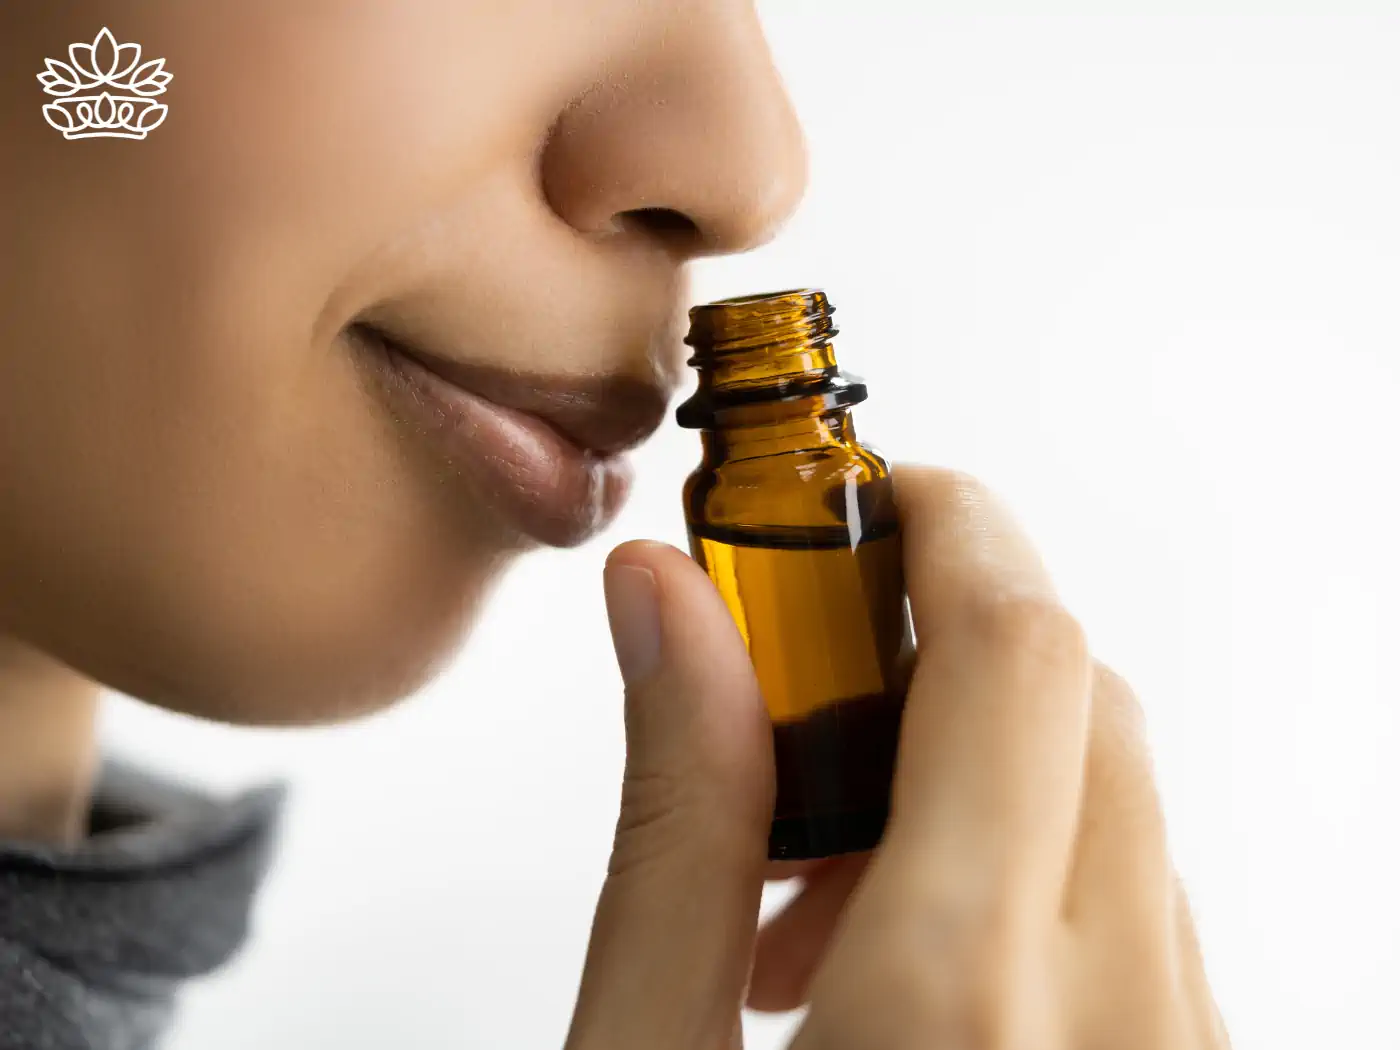 Person smelling an essential oil bottle close-up. Collection: Essential Oils, Fabulous Flowers & Gifts.